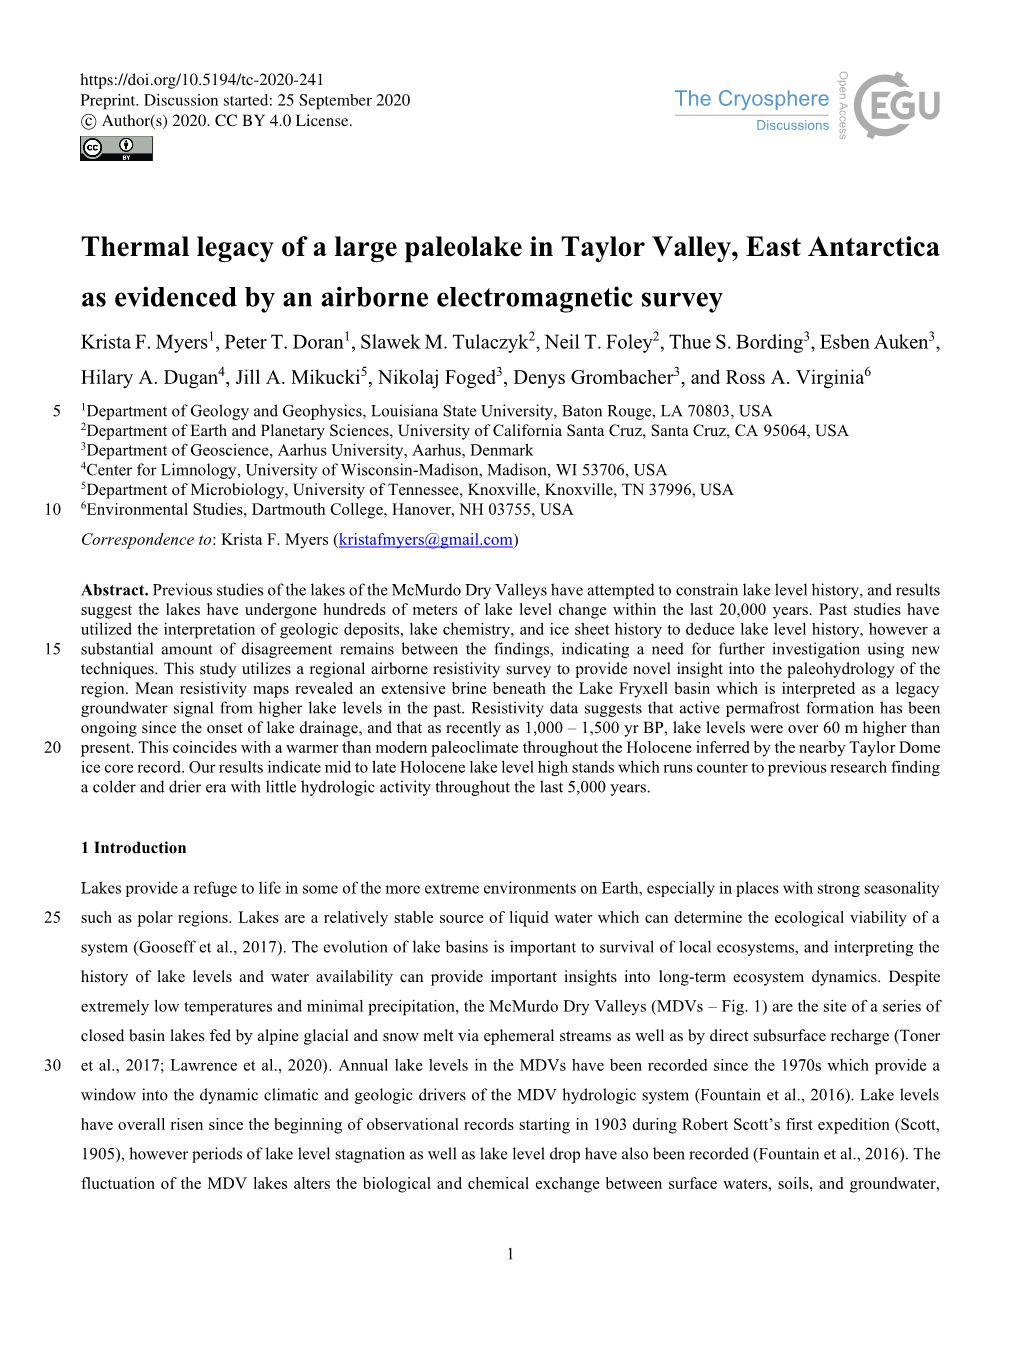 Thermal Legacy of a Large Paleolake in Taylor Valley, East Antarctica As